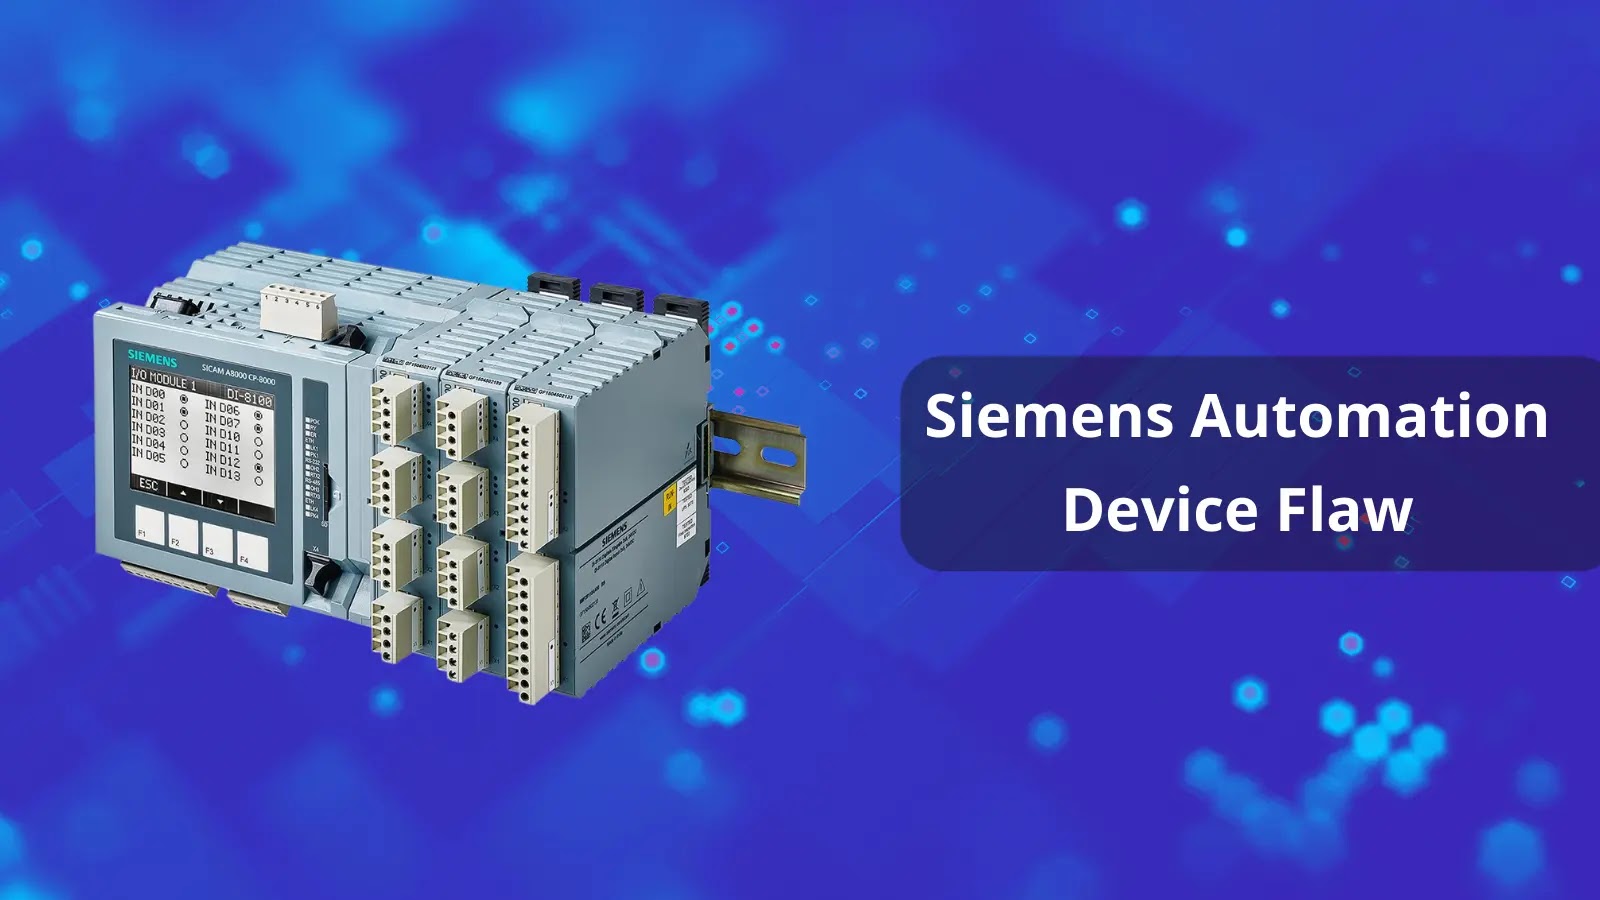 Siemens Automation Device Flaw